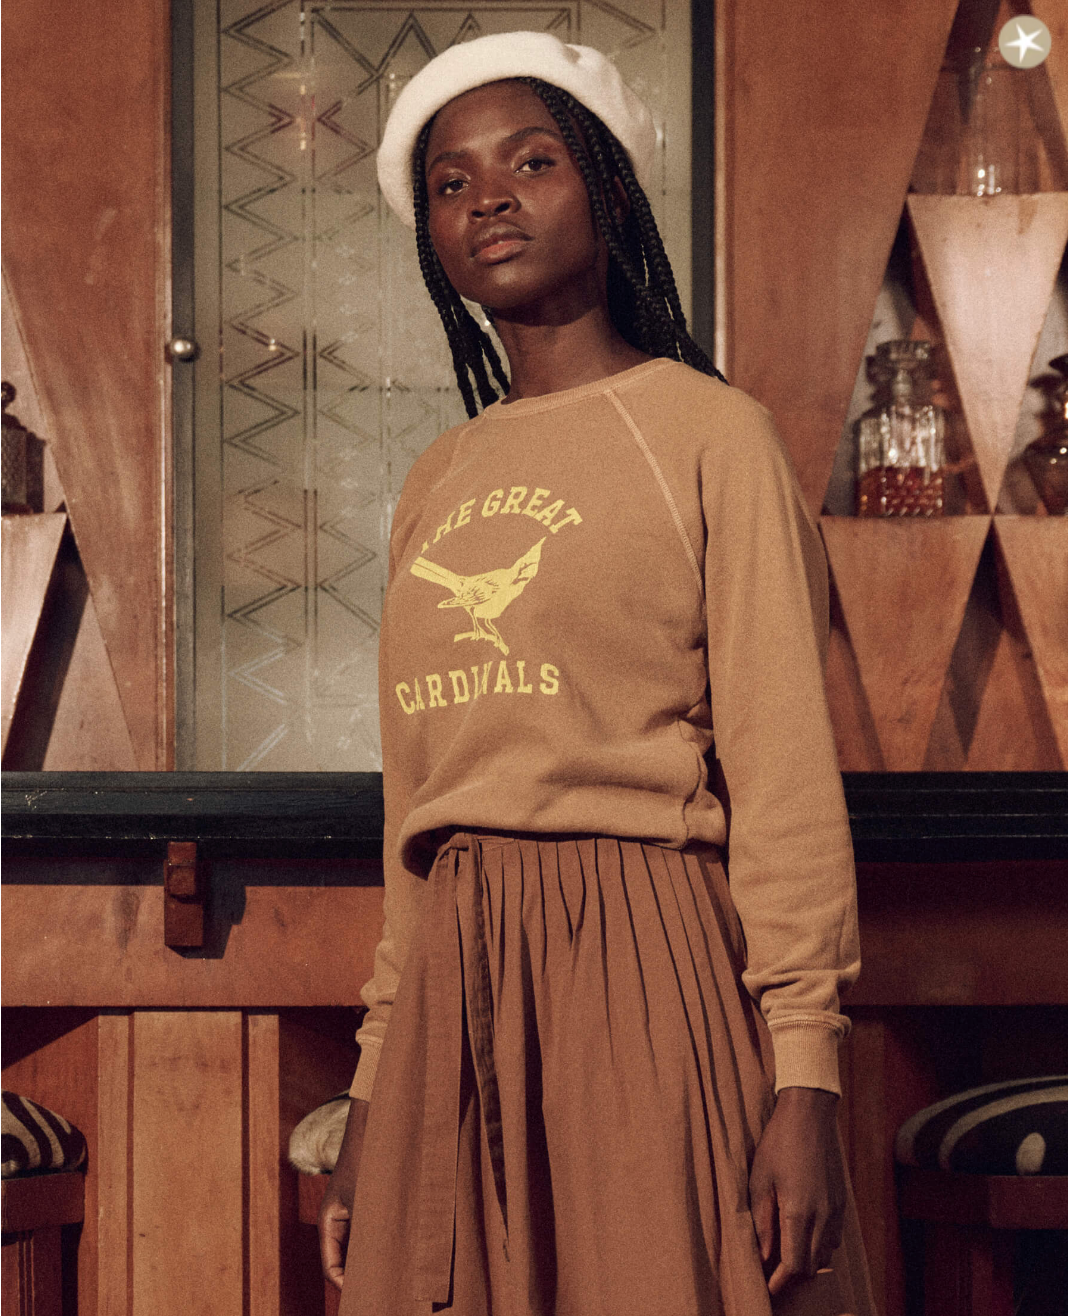 A Black woman wearing a white beret and The Shrunken Sweatshirt from The Great Inc. with the WASHED SUNTAN WITH PERCHED CARDINAL GRAPHIC print stands in front of a wooden and glass background of a Scottsdale, Arizona bungalow, looking thoughtfully to her left.